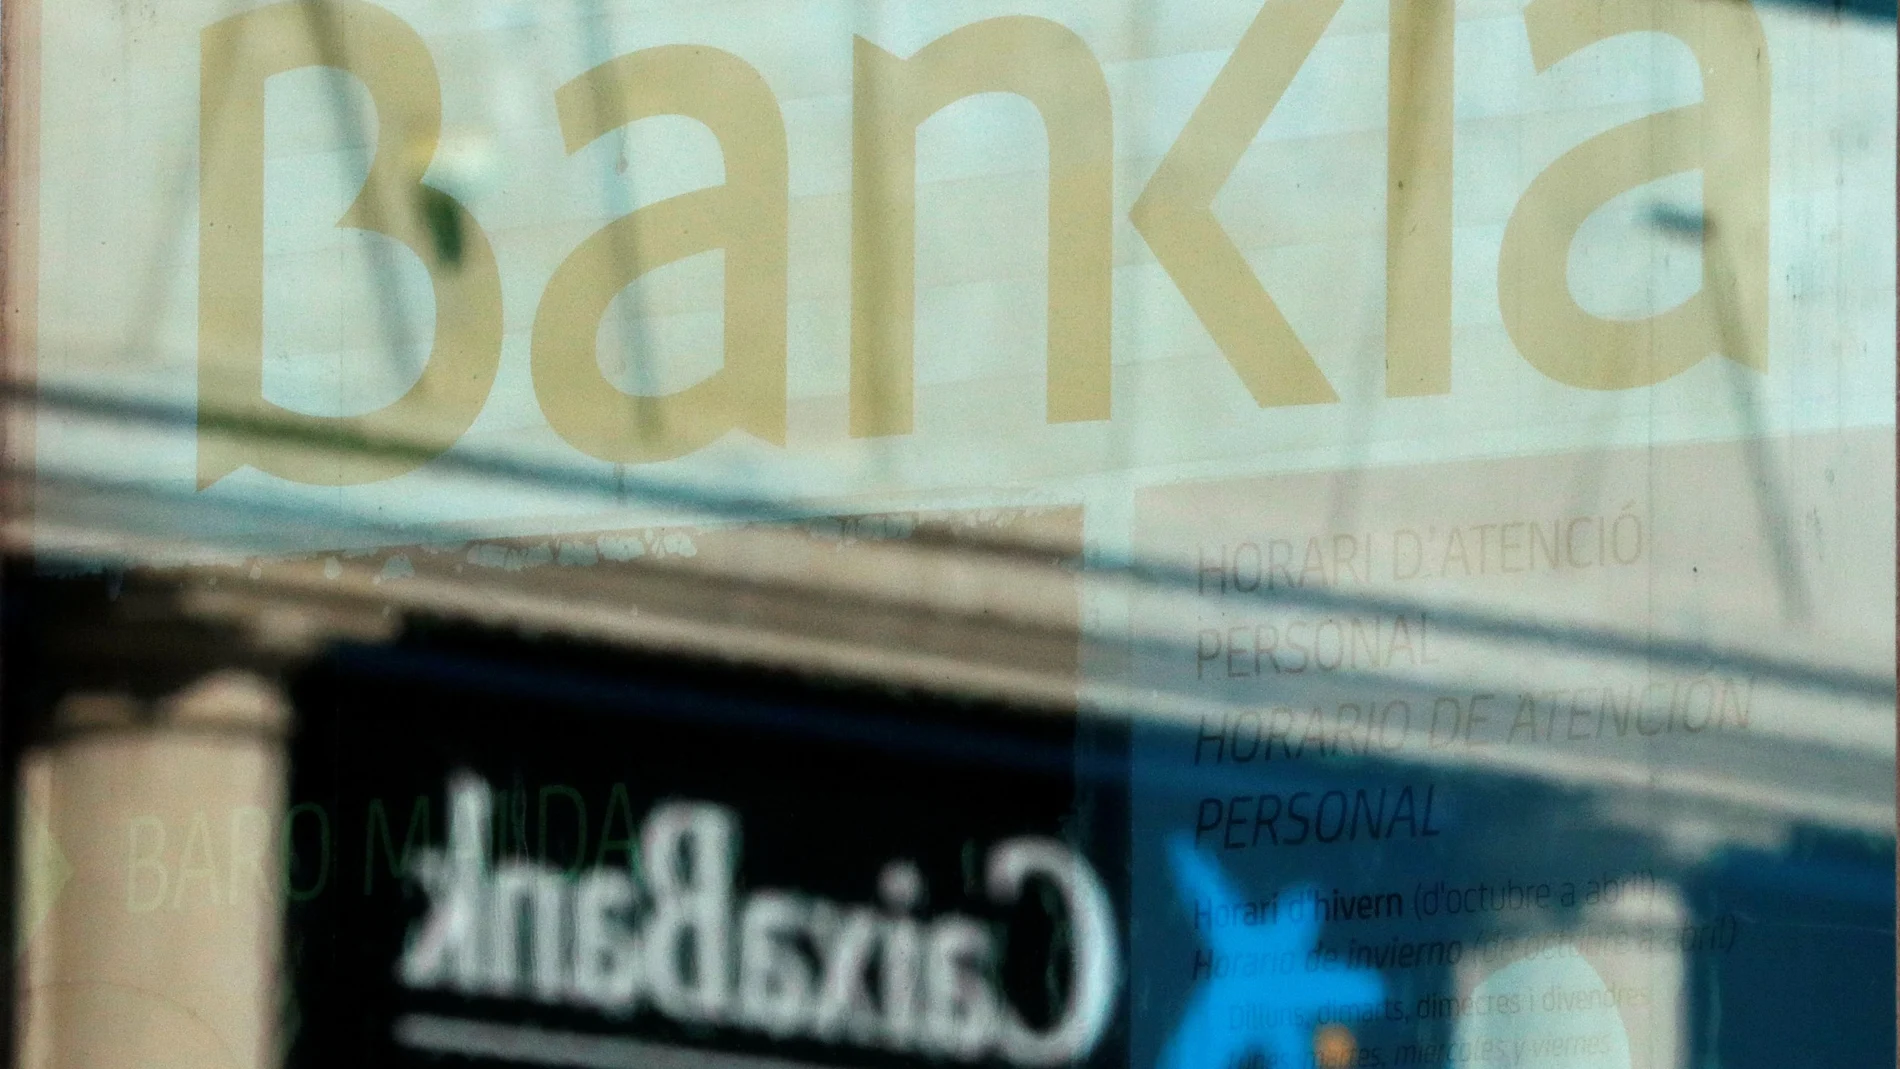 Logos of Caixabank and Bankia's are seen in bank offices near Barcelona